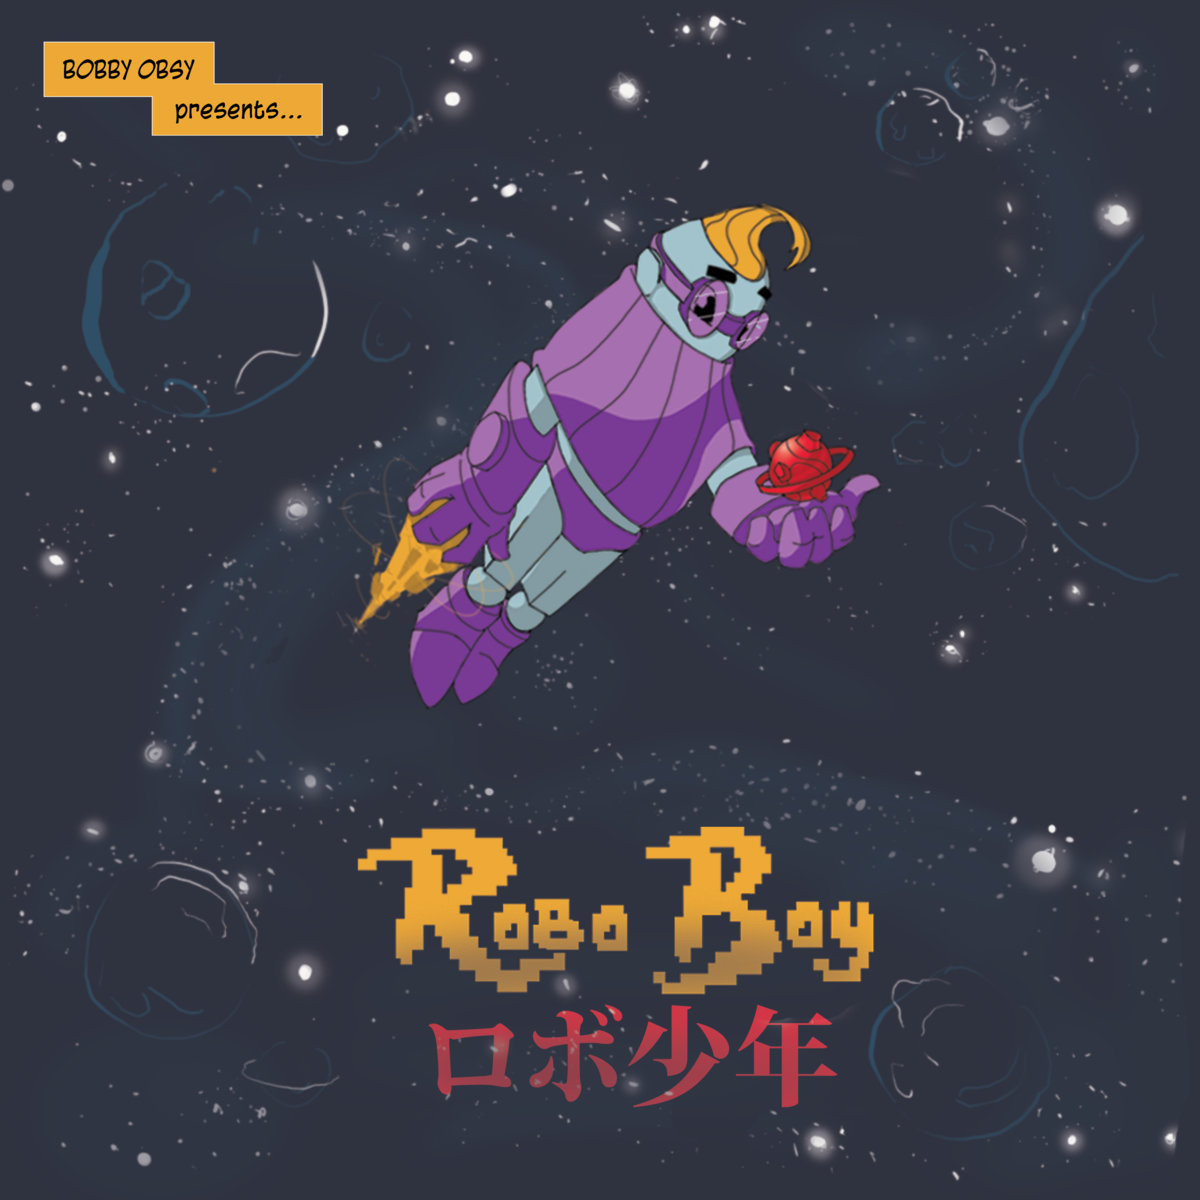 Bobby Obsy delivers chill vibes on his latest EP "Robo Boy"